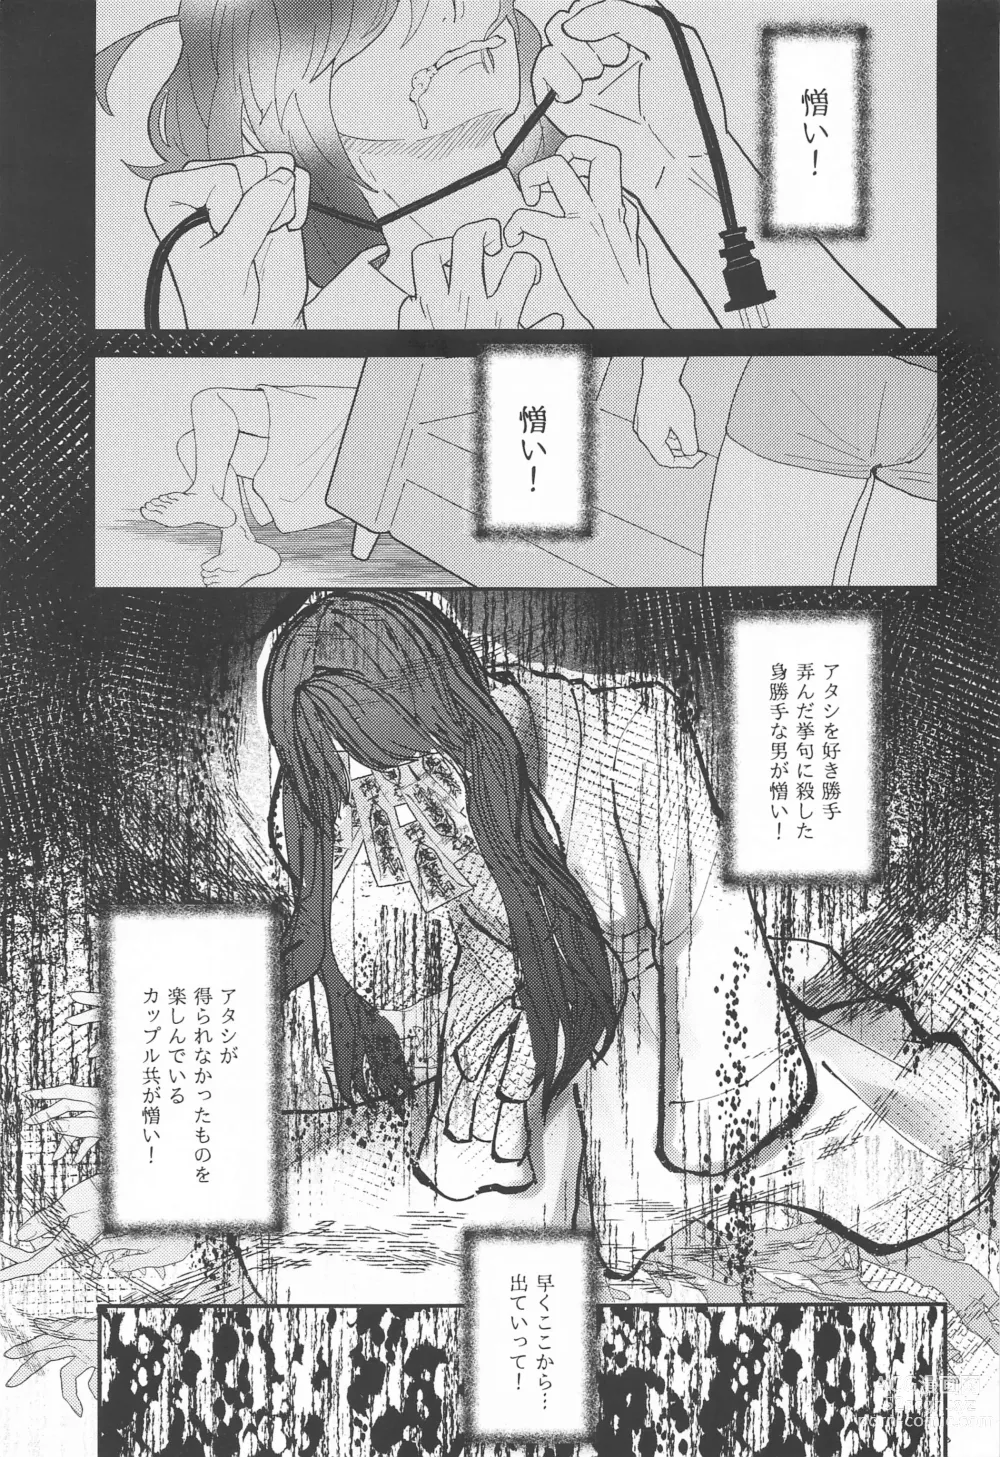 Page 2 of doujinshi Ghost in Love Palace